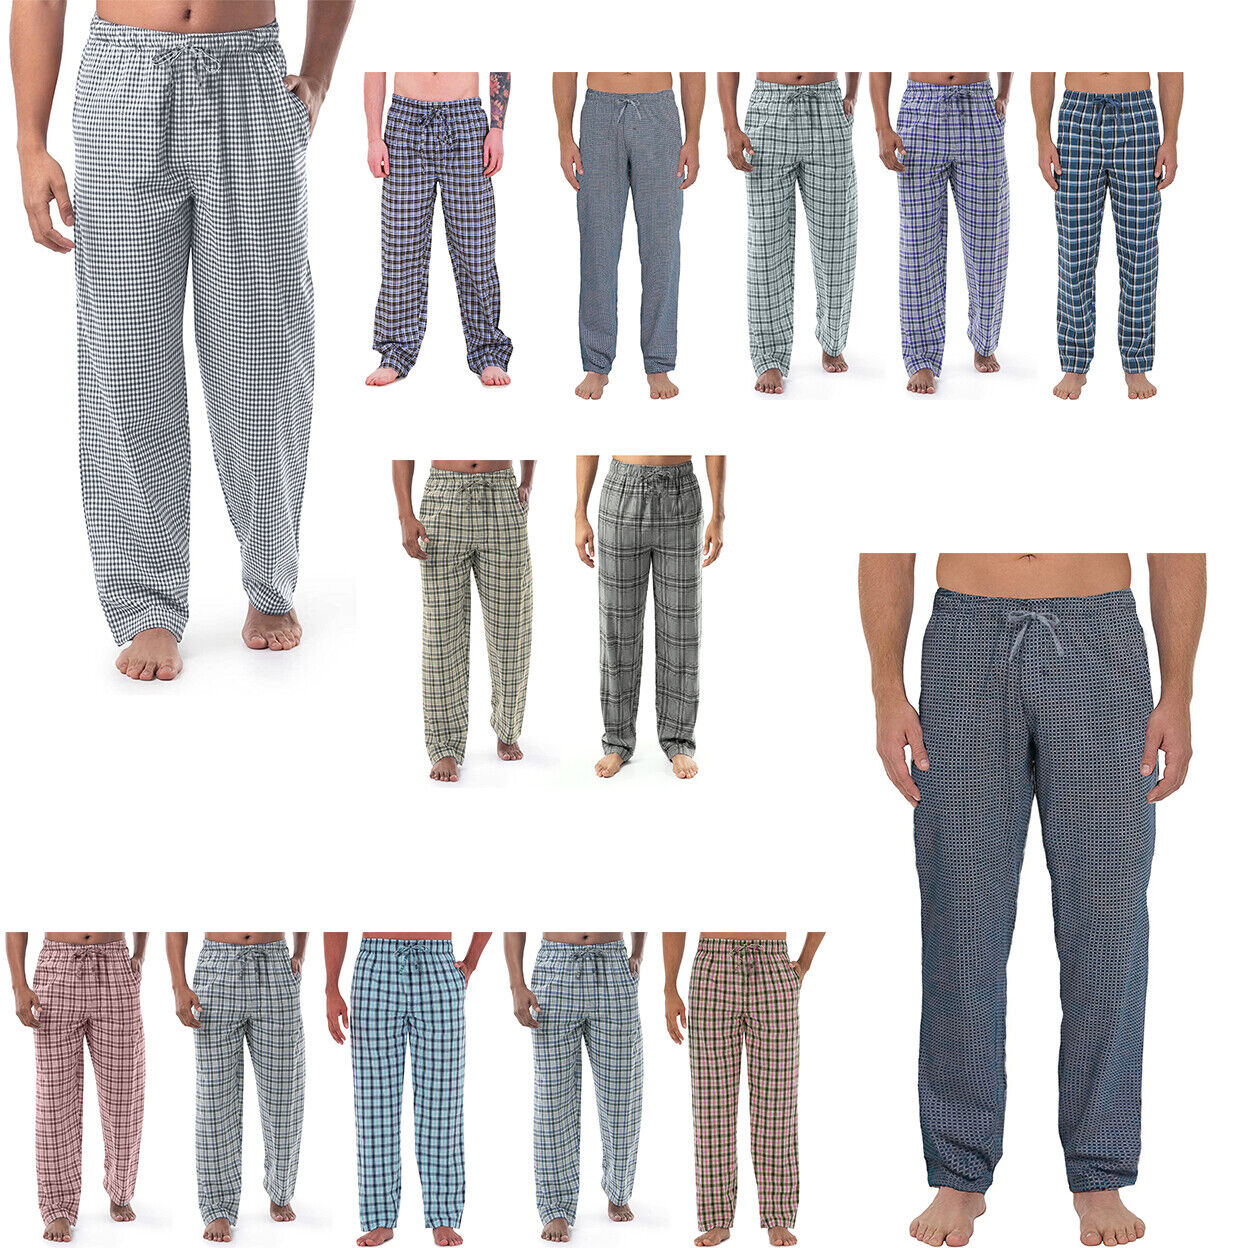 2-Pack: Men's Ultra-Soft Solid & Plaid Cotton Jersey Knit Comfy Sleep Lounge Pajama Pants - Solid, Large